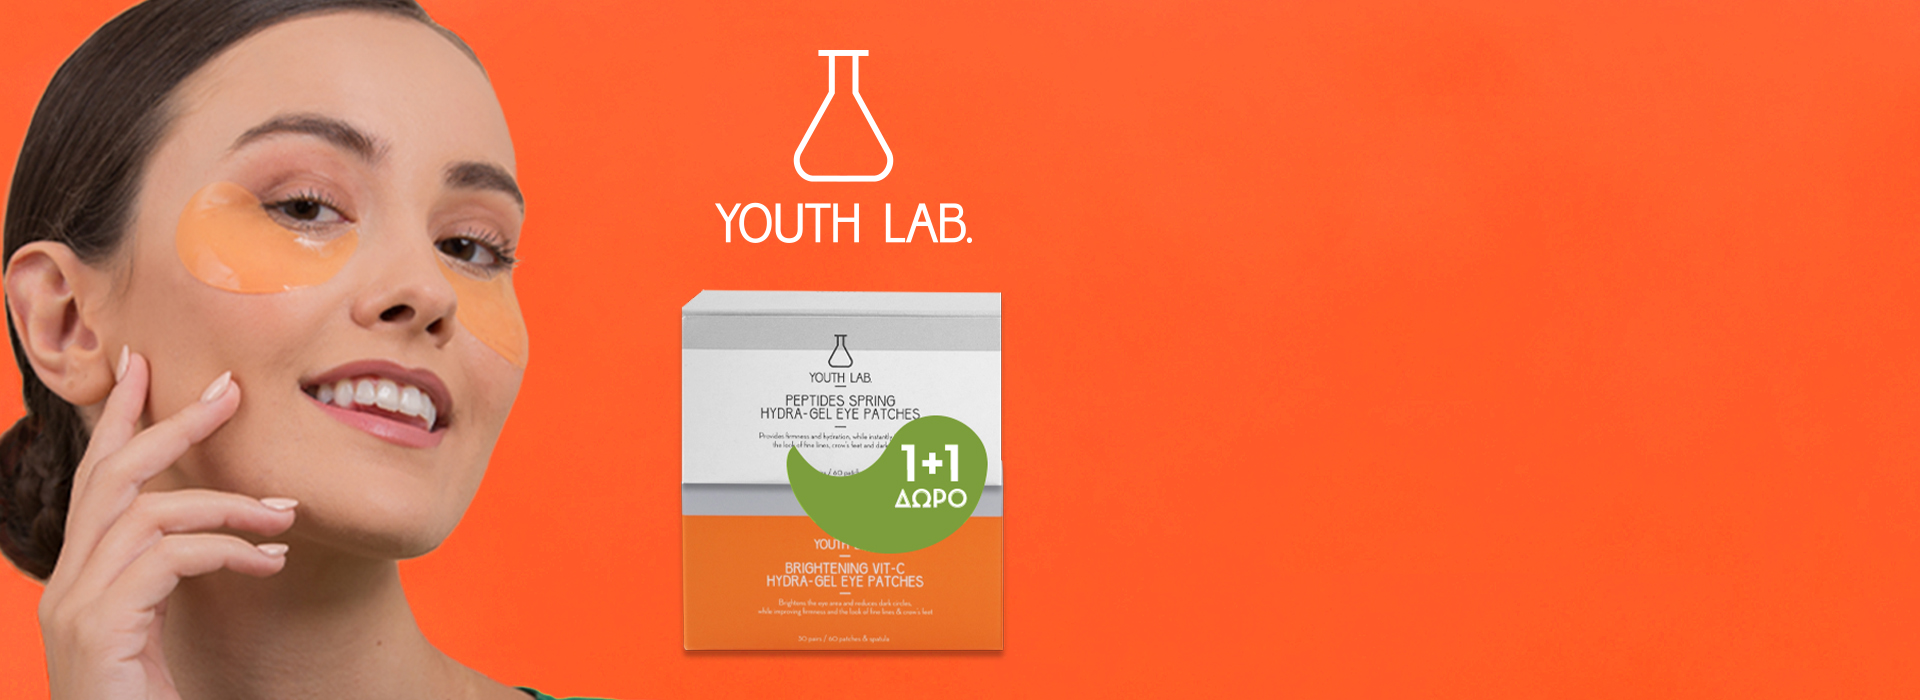 Youth Lab. 1+1 eye patches offer!